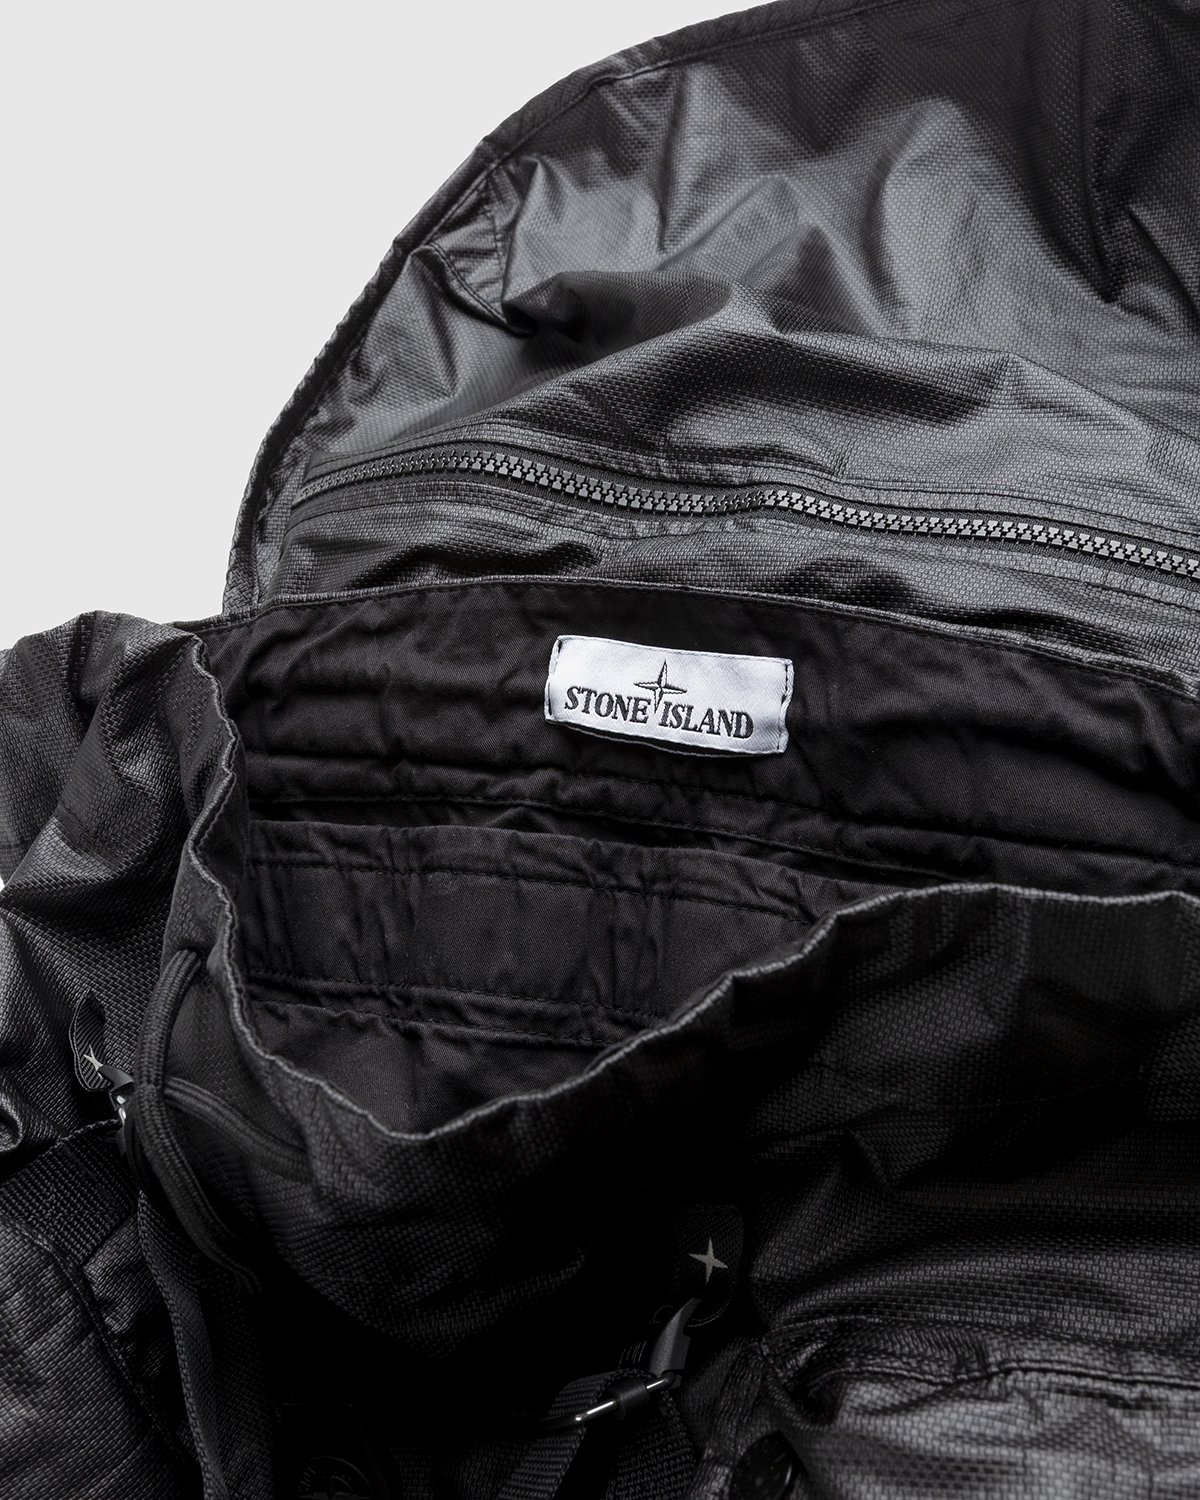 Stone Island - Dyed Backpack Black - Accessories - Black - Image 5